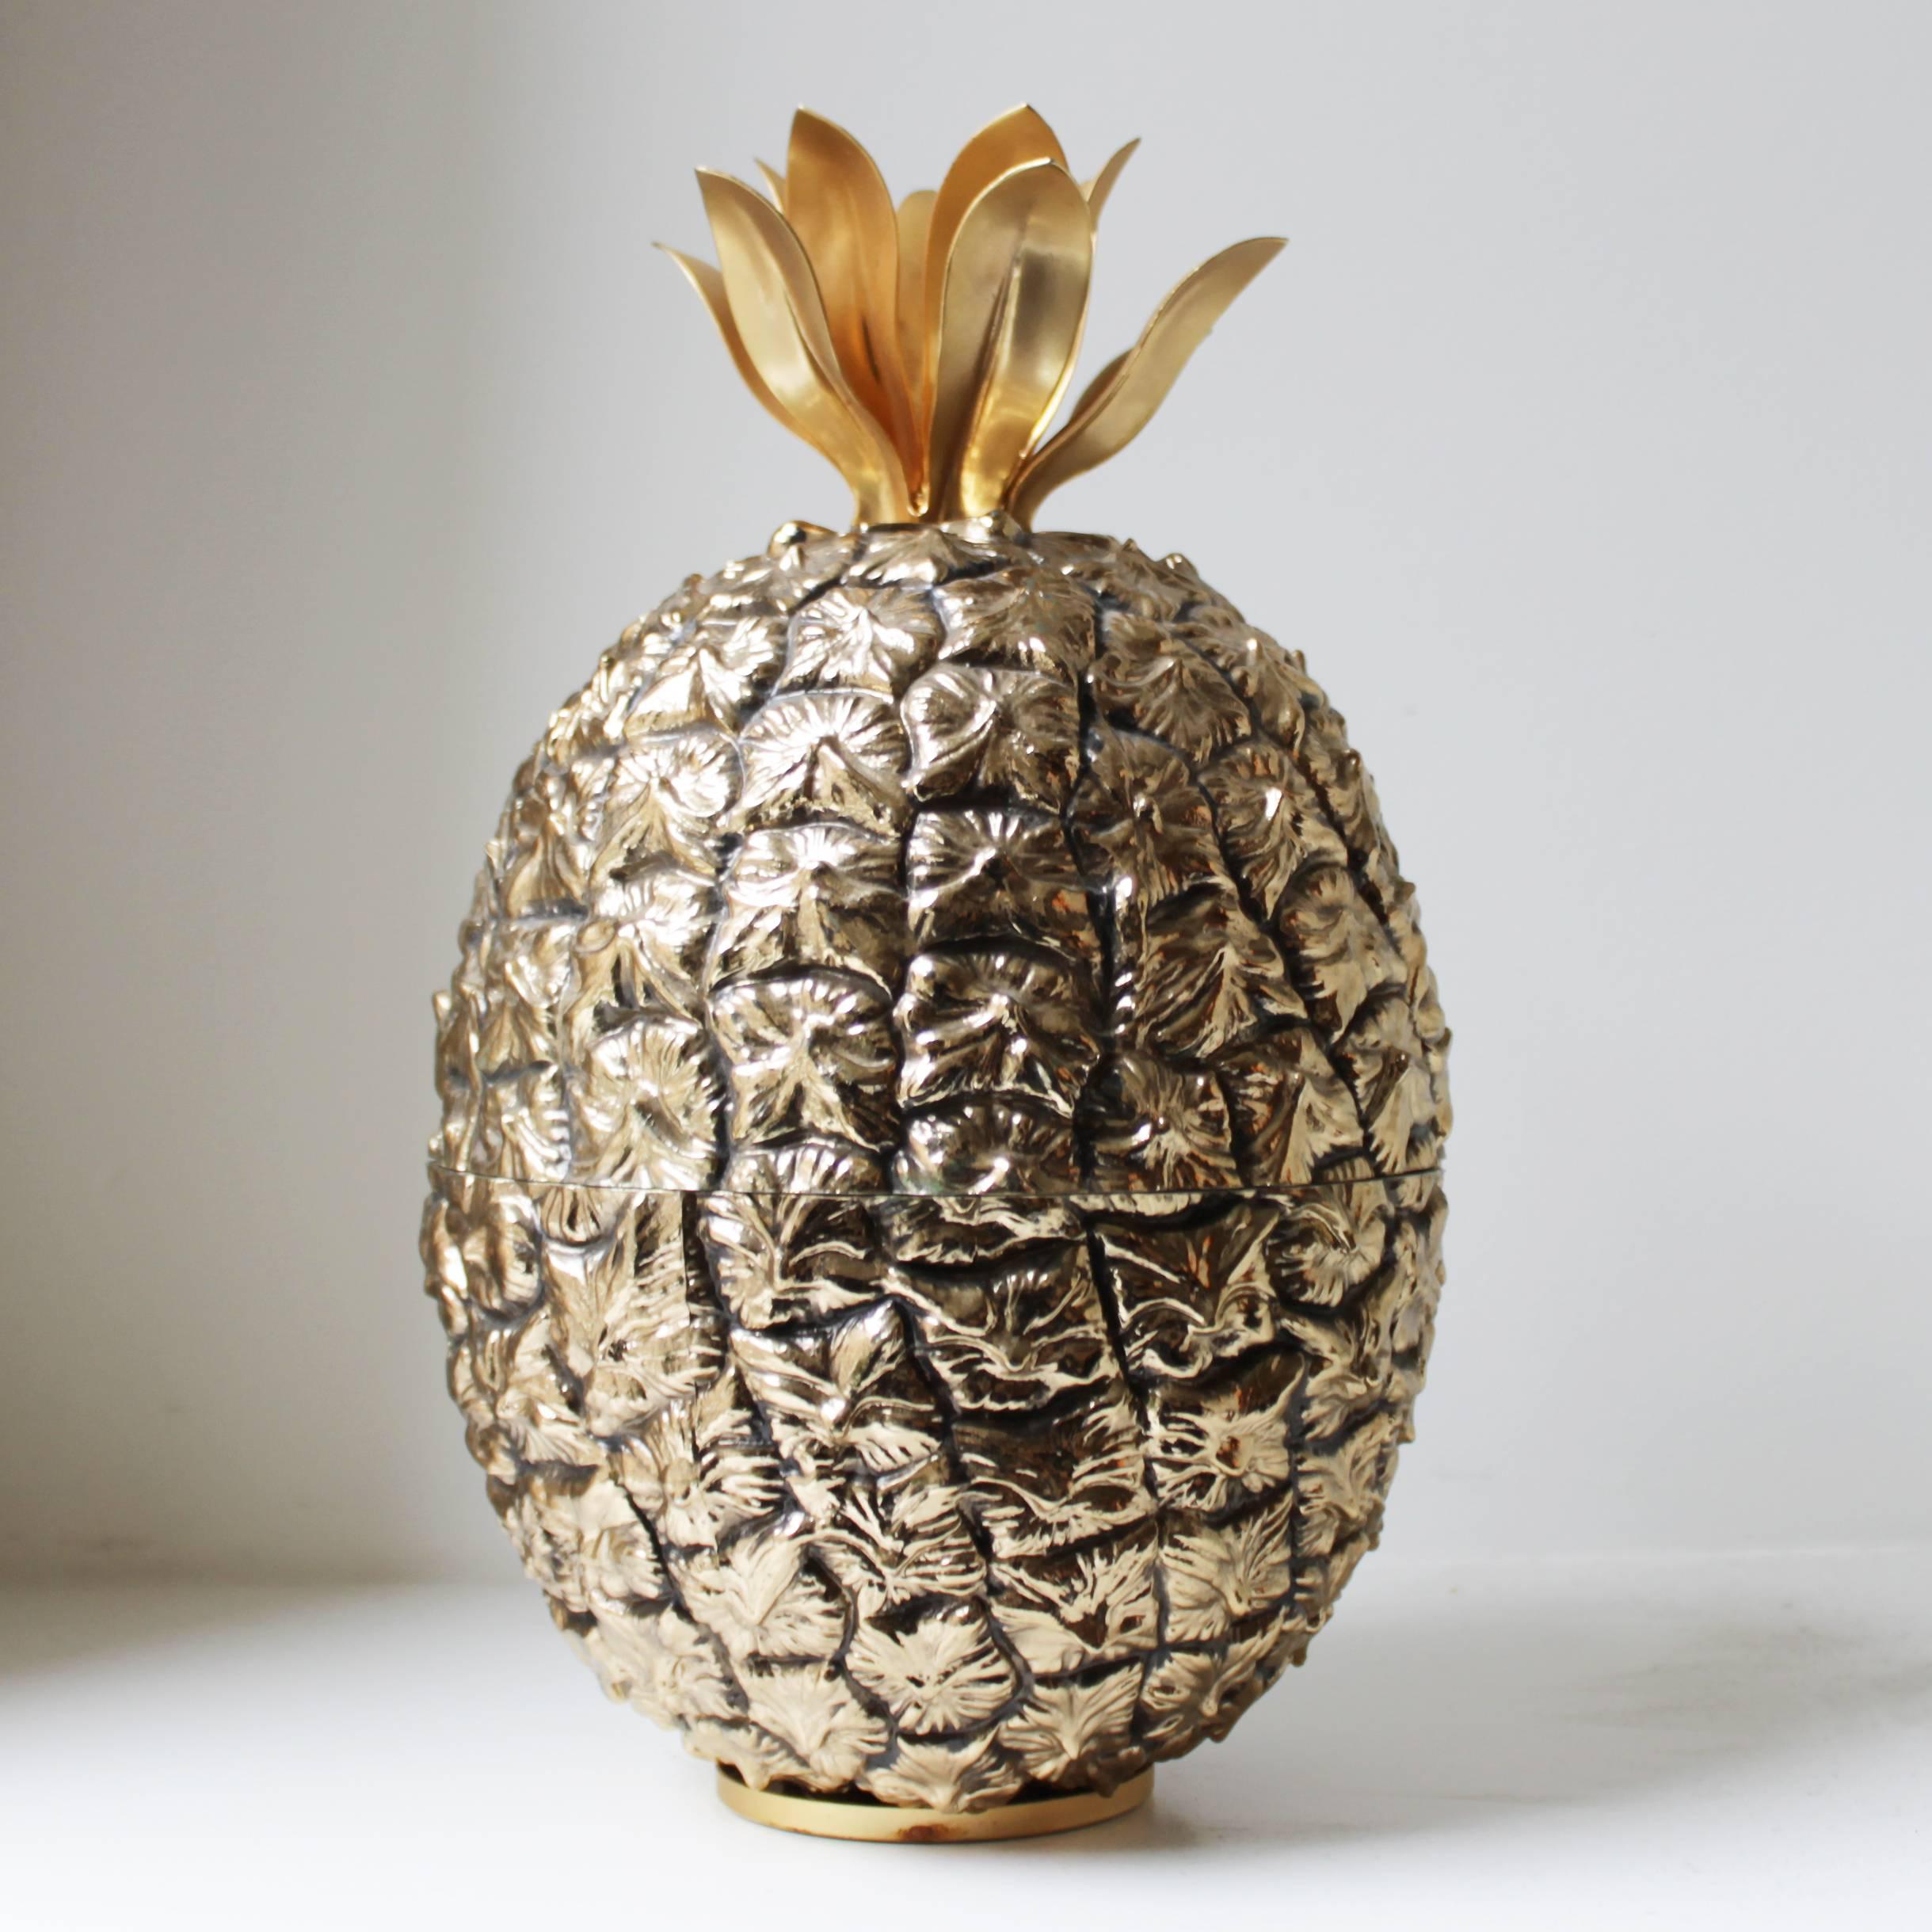 French signed pineapple shaped ice bucket. Gold toned anodized aluminum (exterior) and plastic (interior bucket). Beautiful condition. Marked: Michel Dartois, Paris.